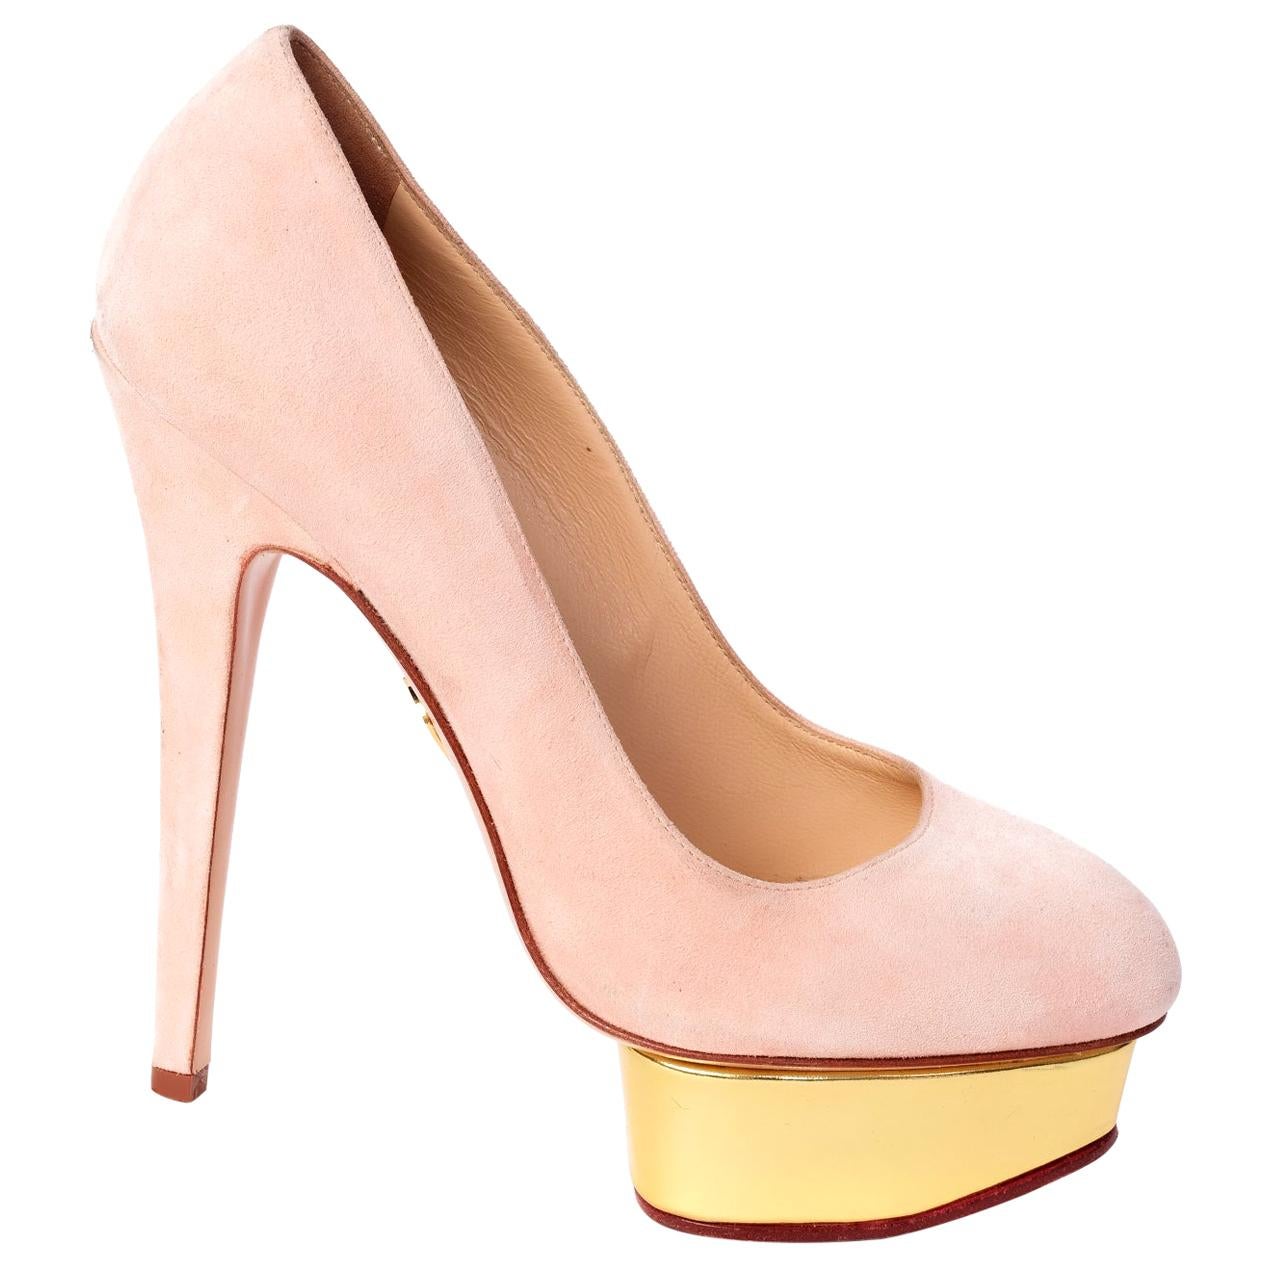 Charlotte Olympia Dolly Nude Suede Platform Pump (37 EU) For Sale